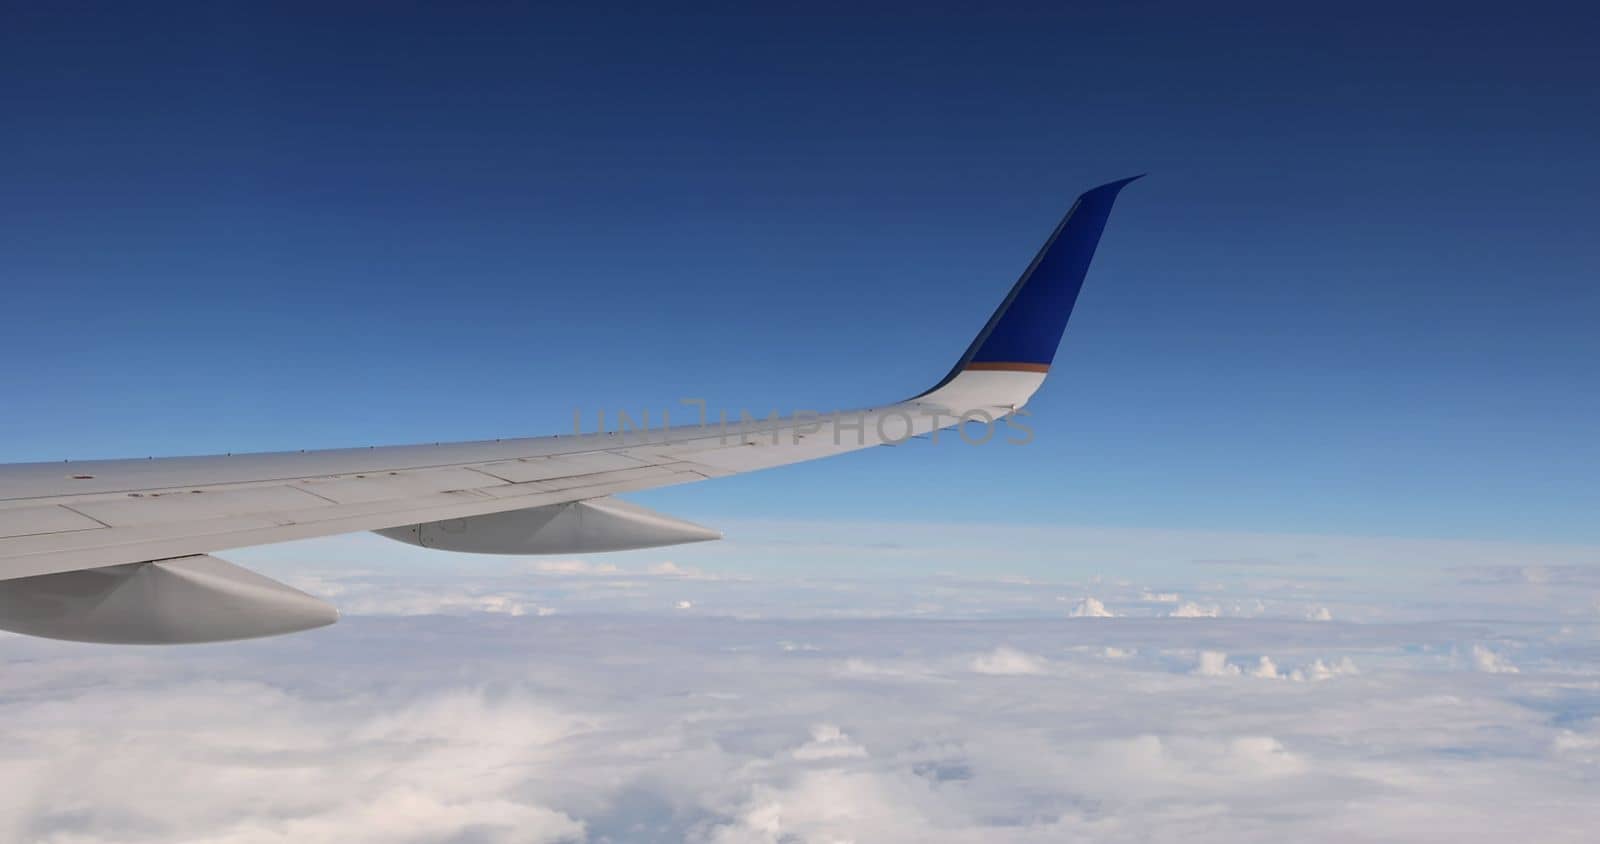 In background of fluffy cloudy sky, an airplane wing is seen flying above clouds skies from window